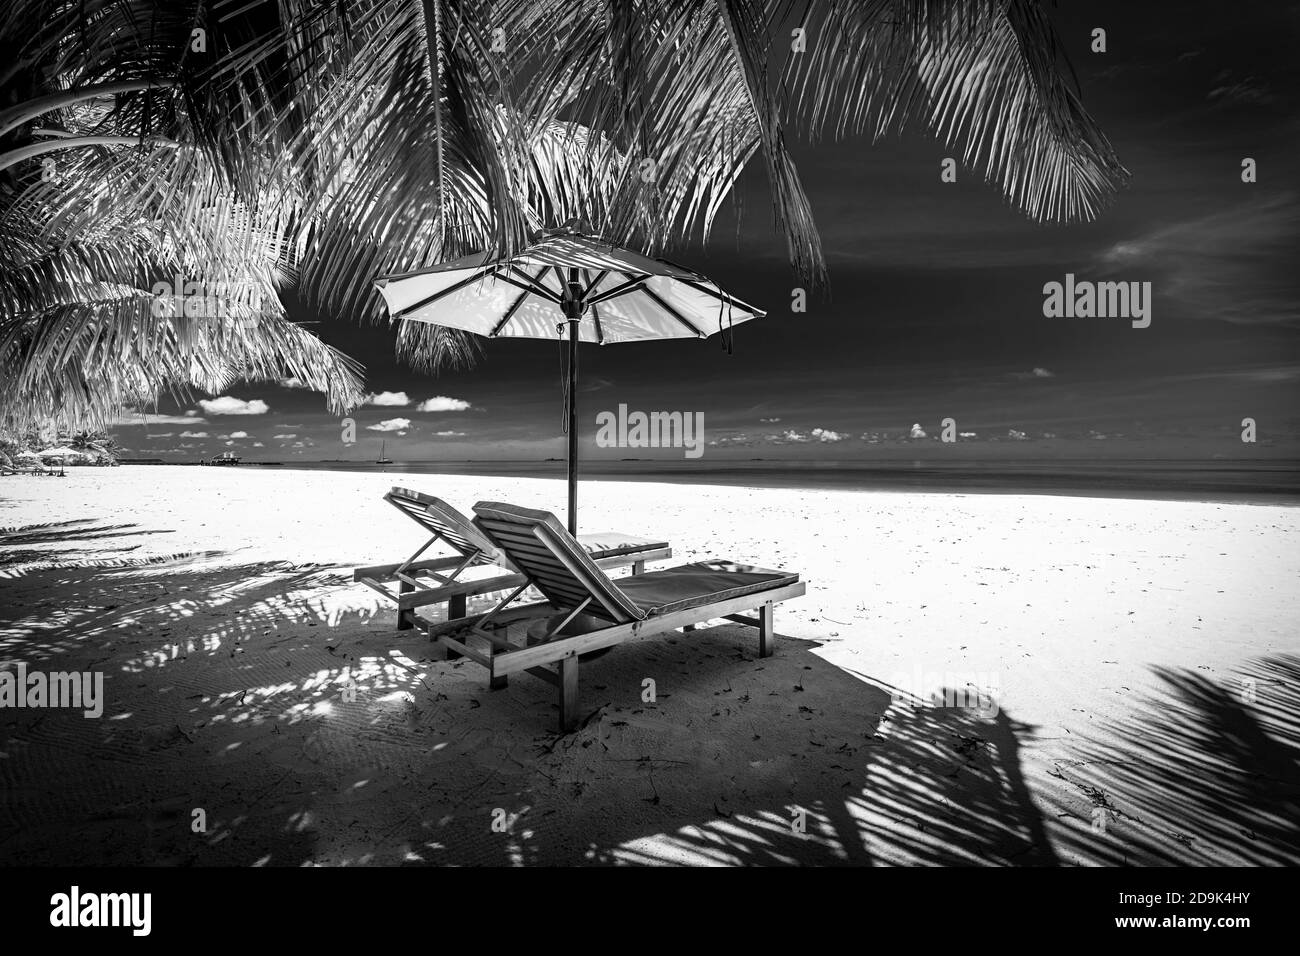 Artistic black and white landscape of tropical beach paradise, chairs and umbrella under palm leaves. Tropical monochrome scenery, amazing photo edit Stock Photo